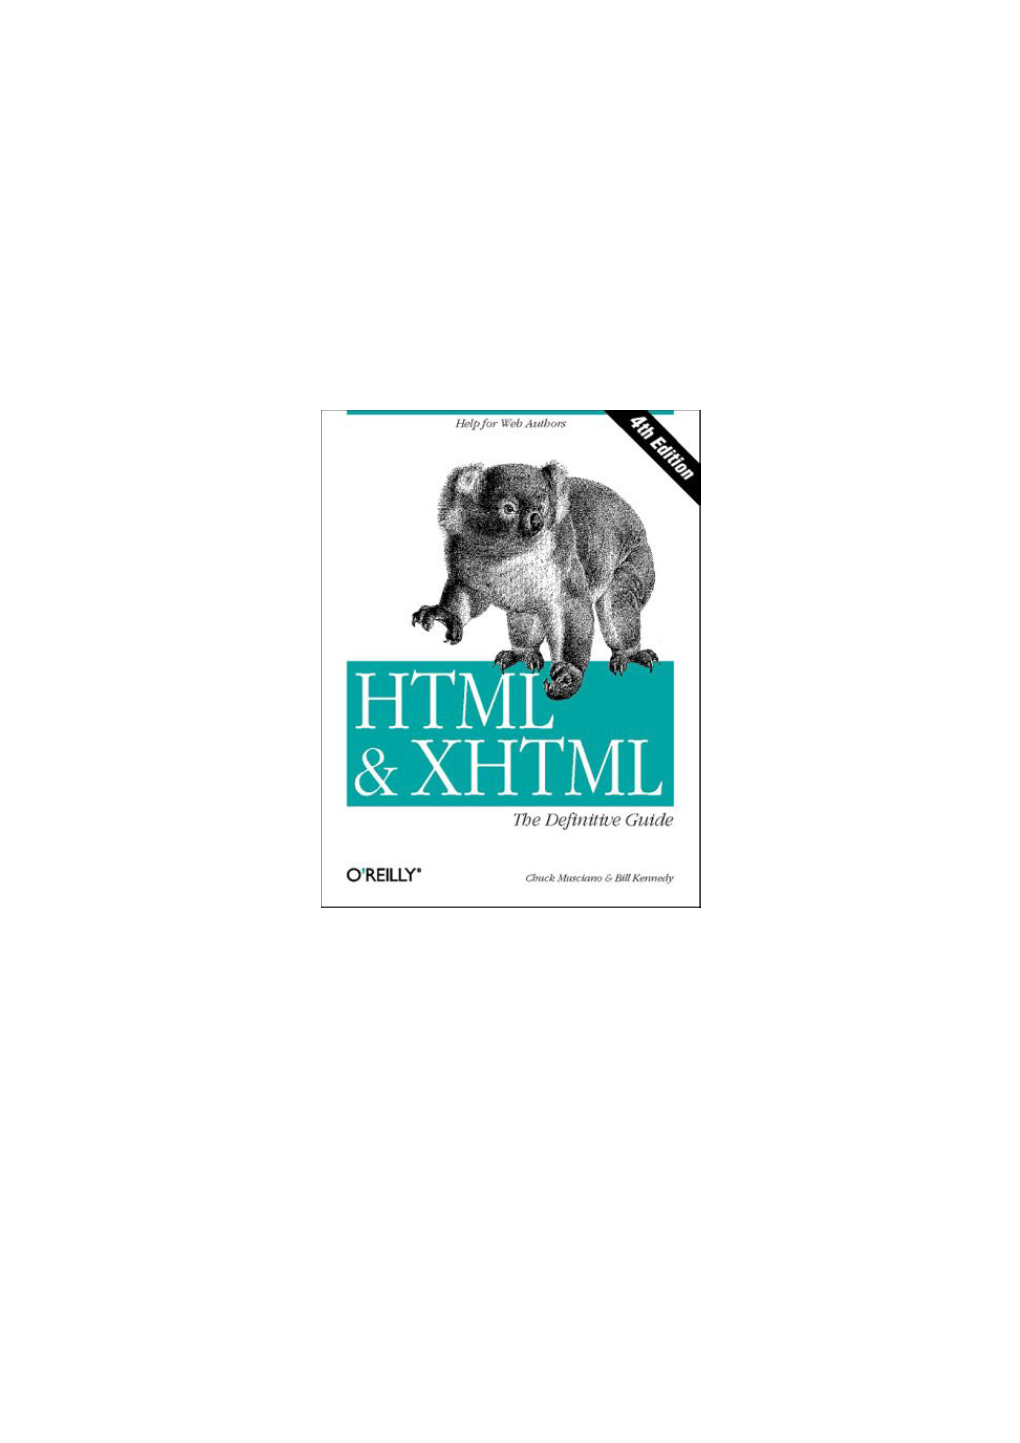 HTML & XHTML: the Definitive Guide, 4Th Edition